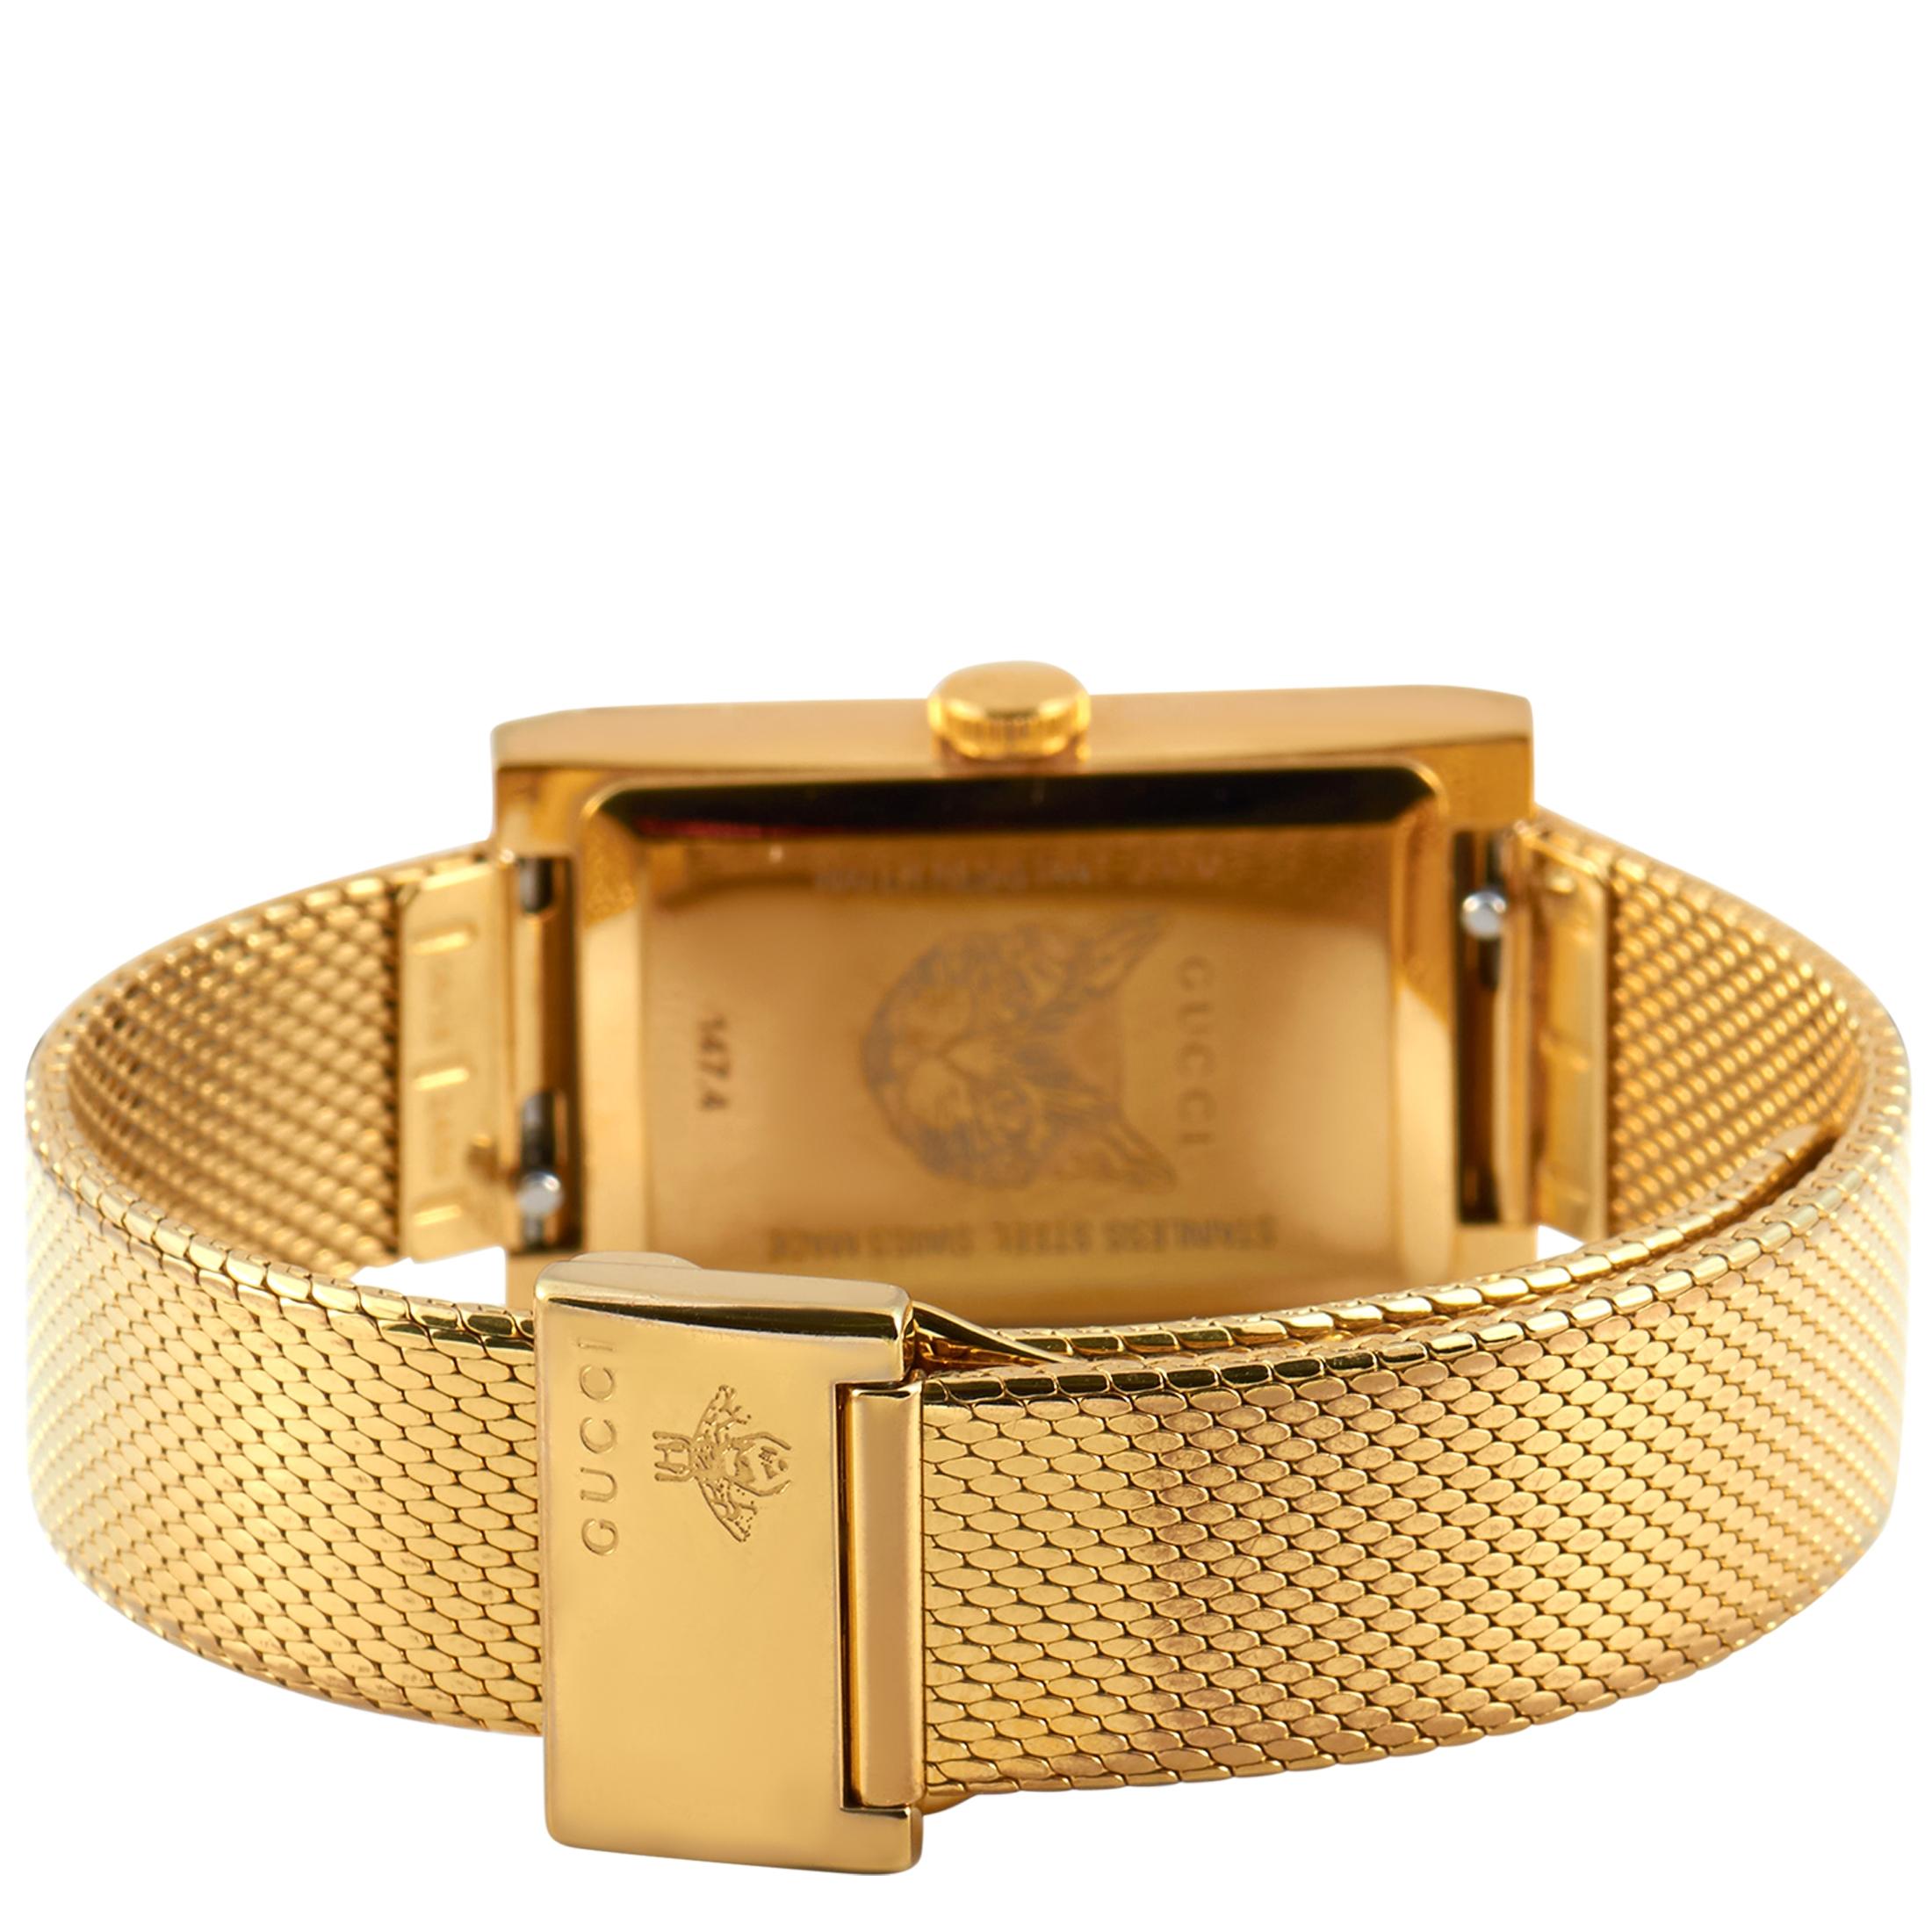 The Gucci G-Frame watch, reference number YA147410, is presented with a yellow gold-tone stainless steel case that is water-resistant to 30 meters. The case is mounted onto a matching yellow gold-tone stainless steel mesh bracelet, secured on the